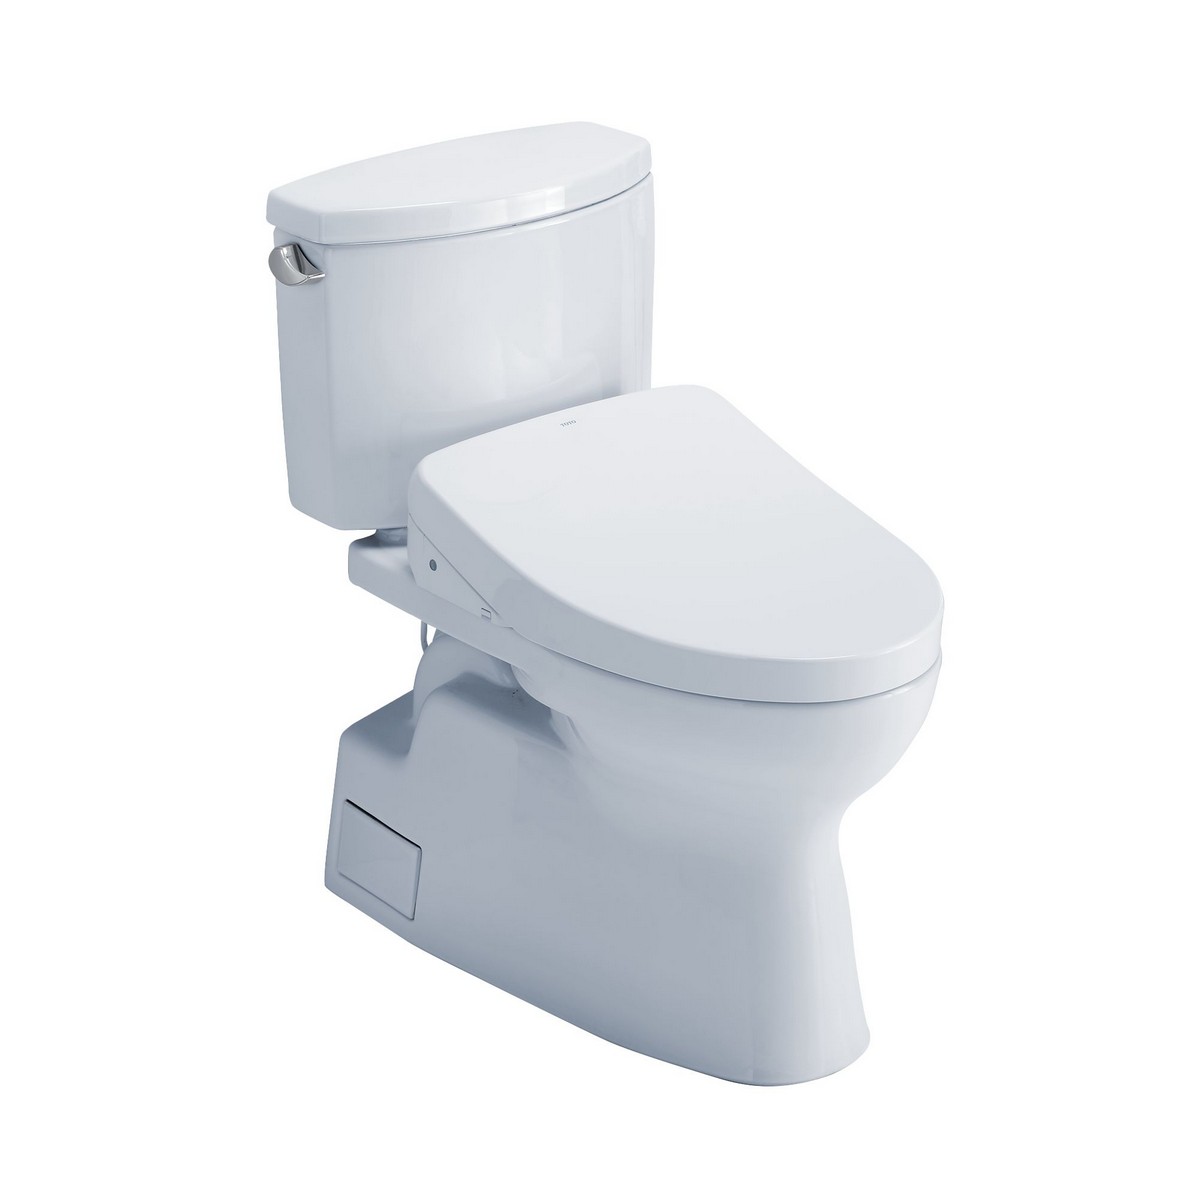 TOTO MW4743056CEF#01 VESPIN II 1.28 GPF TWO PIECE ELONGATED TOILET WITH BIDET SEAT IN COTTON WHITE